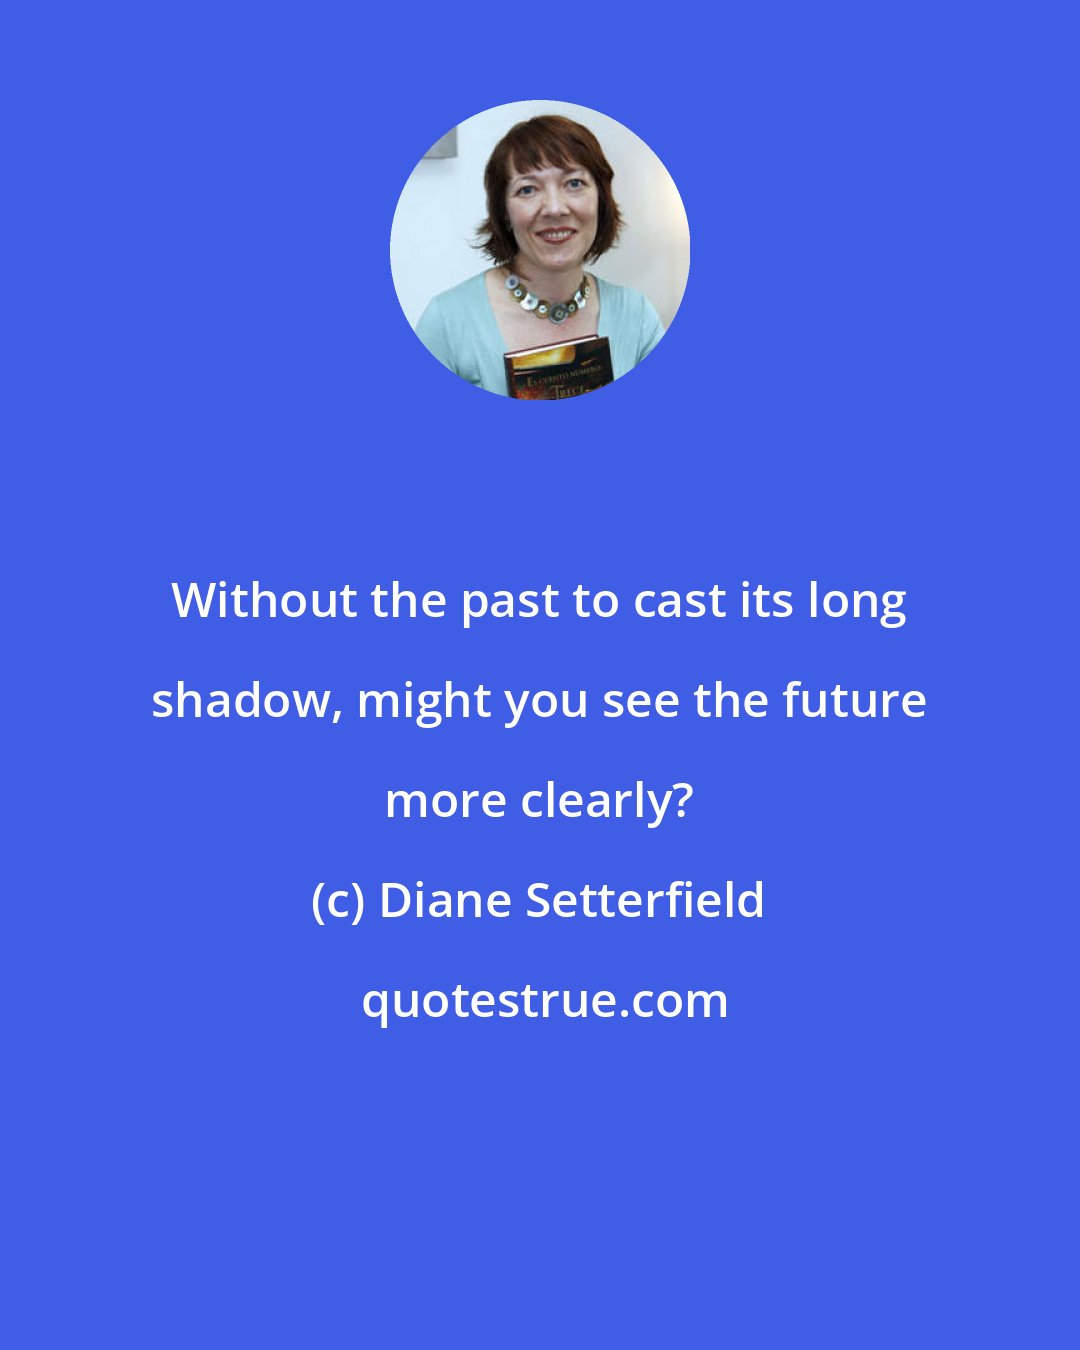 Diane Setterfield: Without the past to cast its long shadow, might you see the future more clearly?